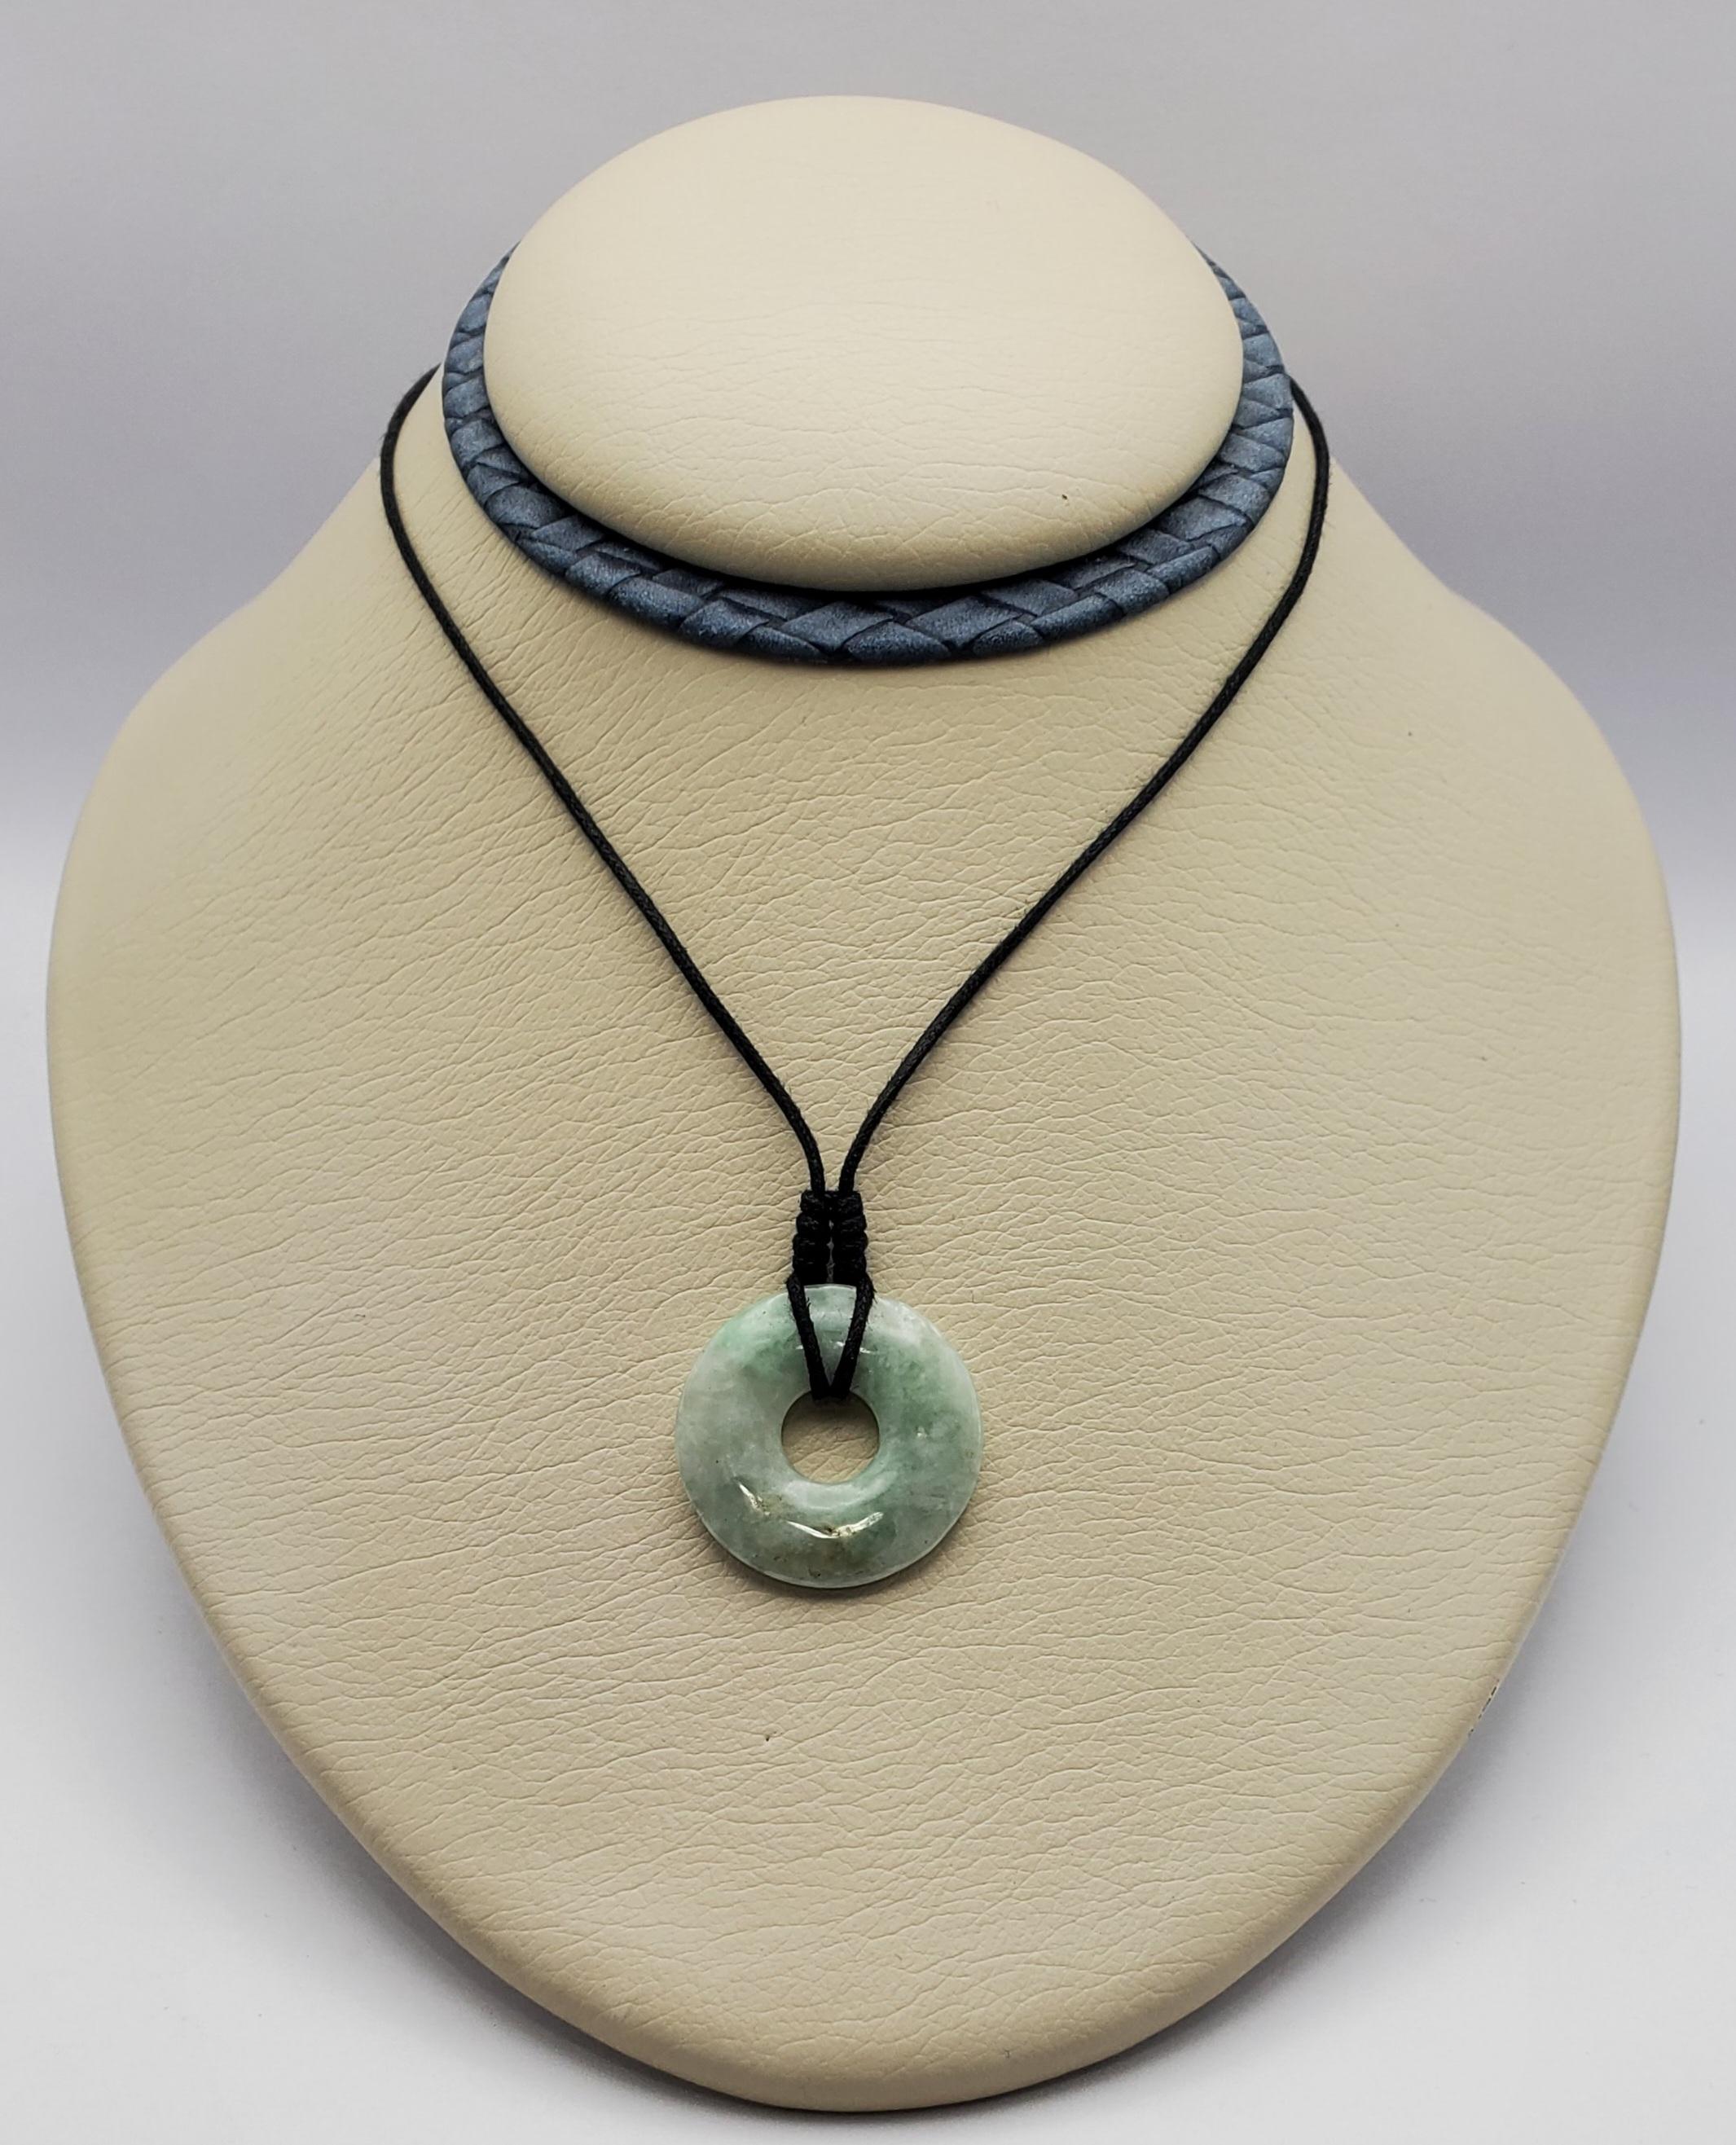 Beautiful 18.83ct Jadeite Jade Donut Disc Peace Wheel Pendant Necklace In Good Condition For Sale In Pittsburgh, PA